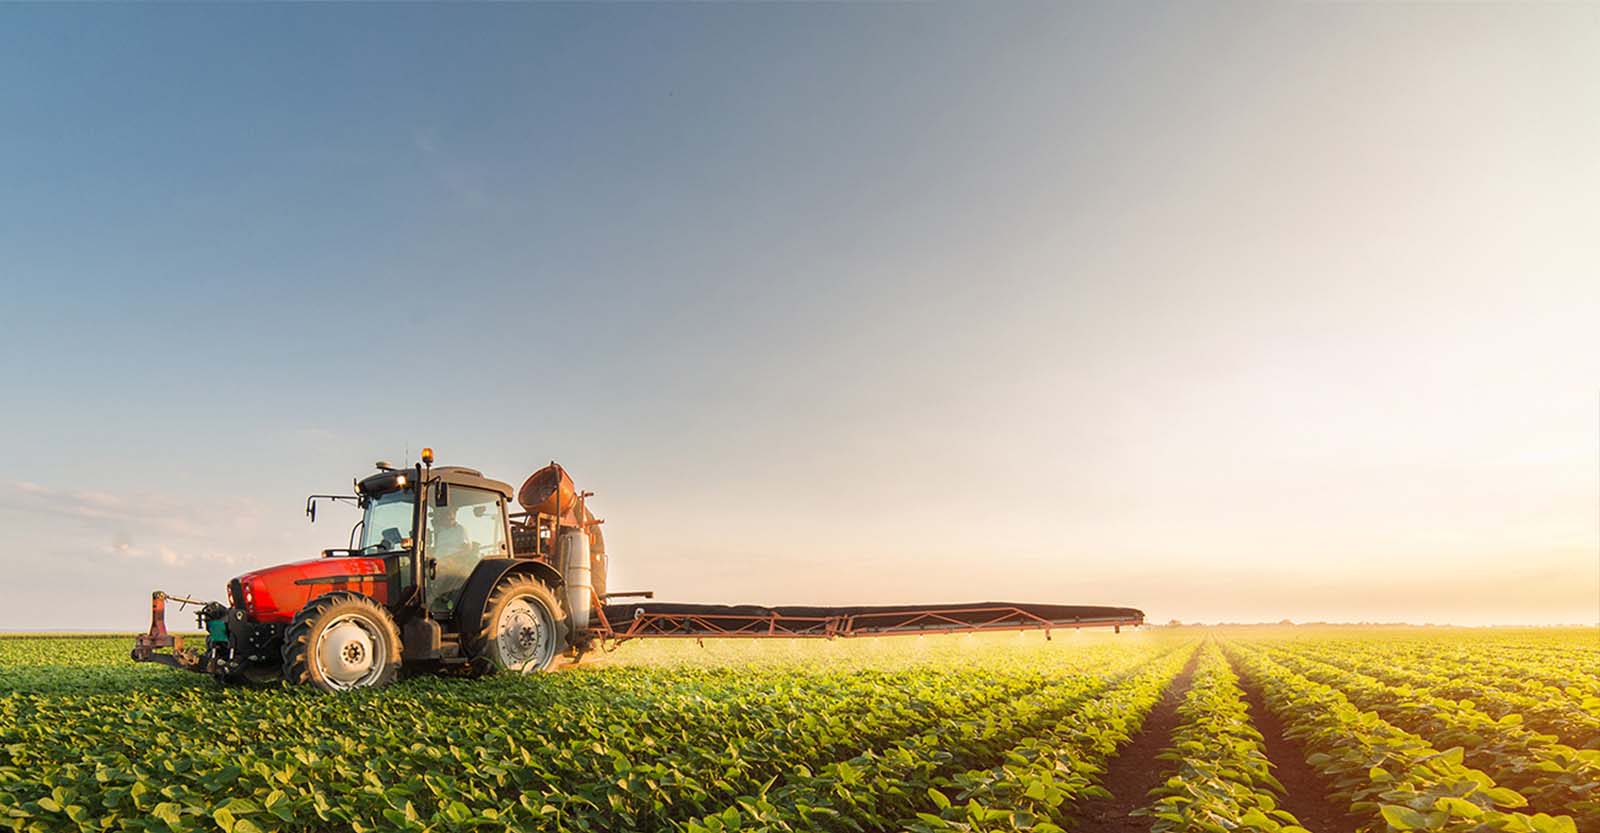 a red tractor plowing in a rows of soybean plants